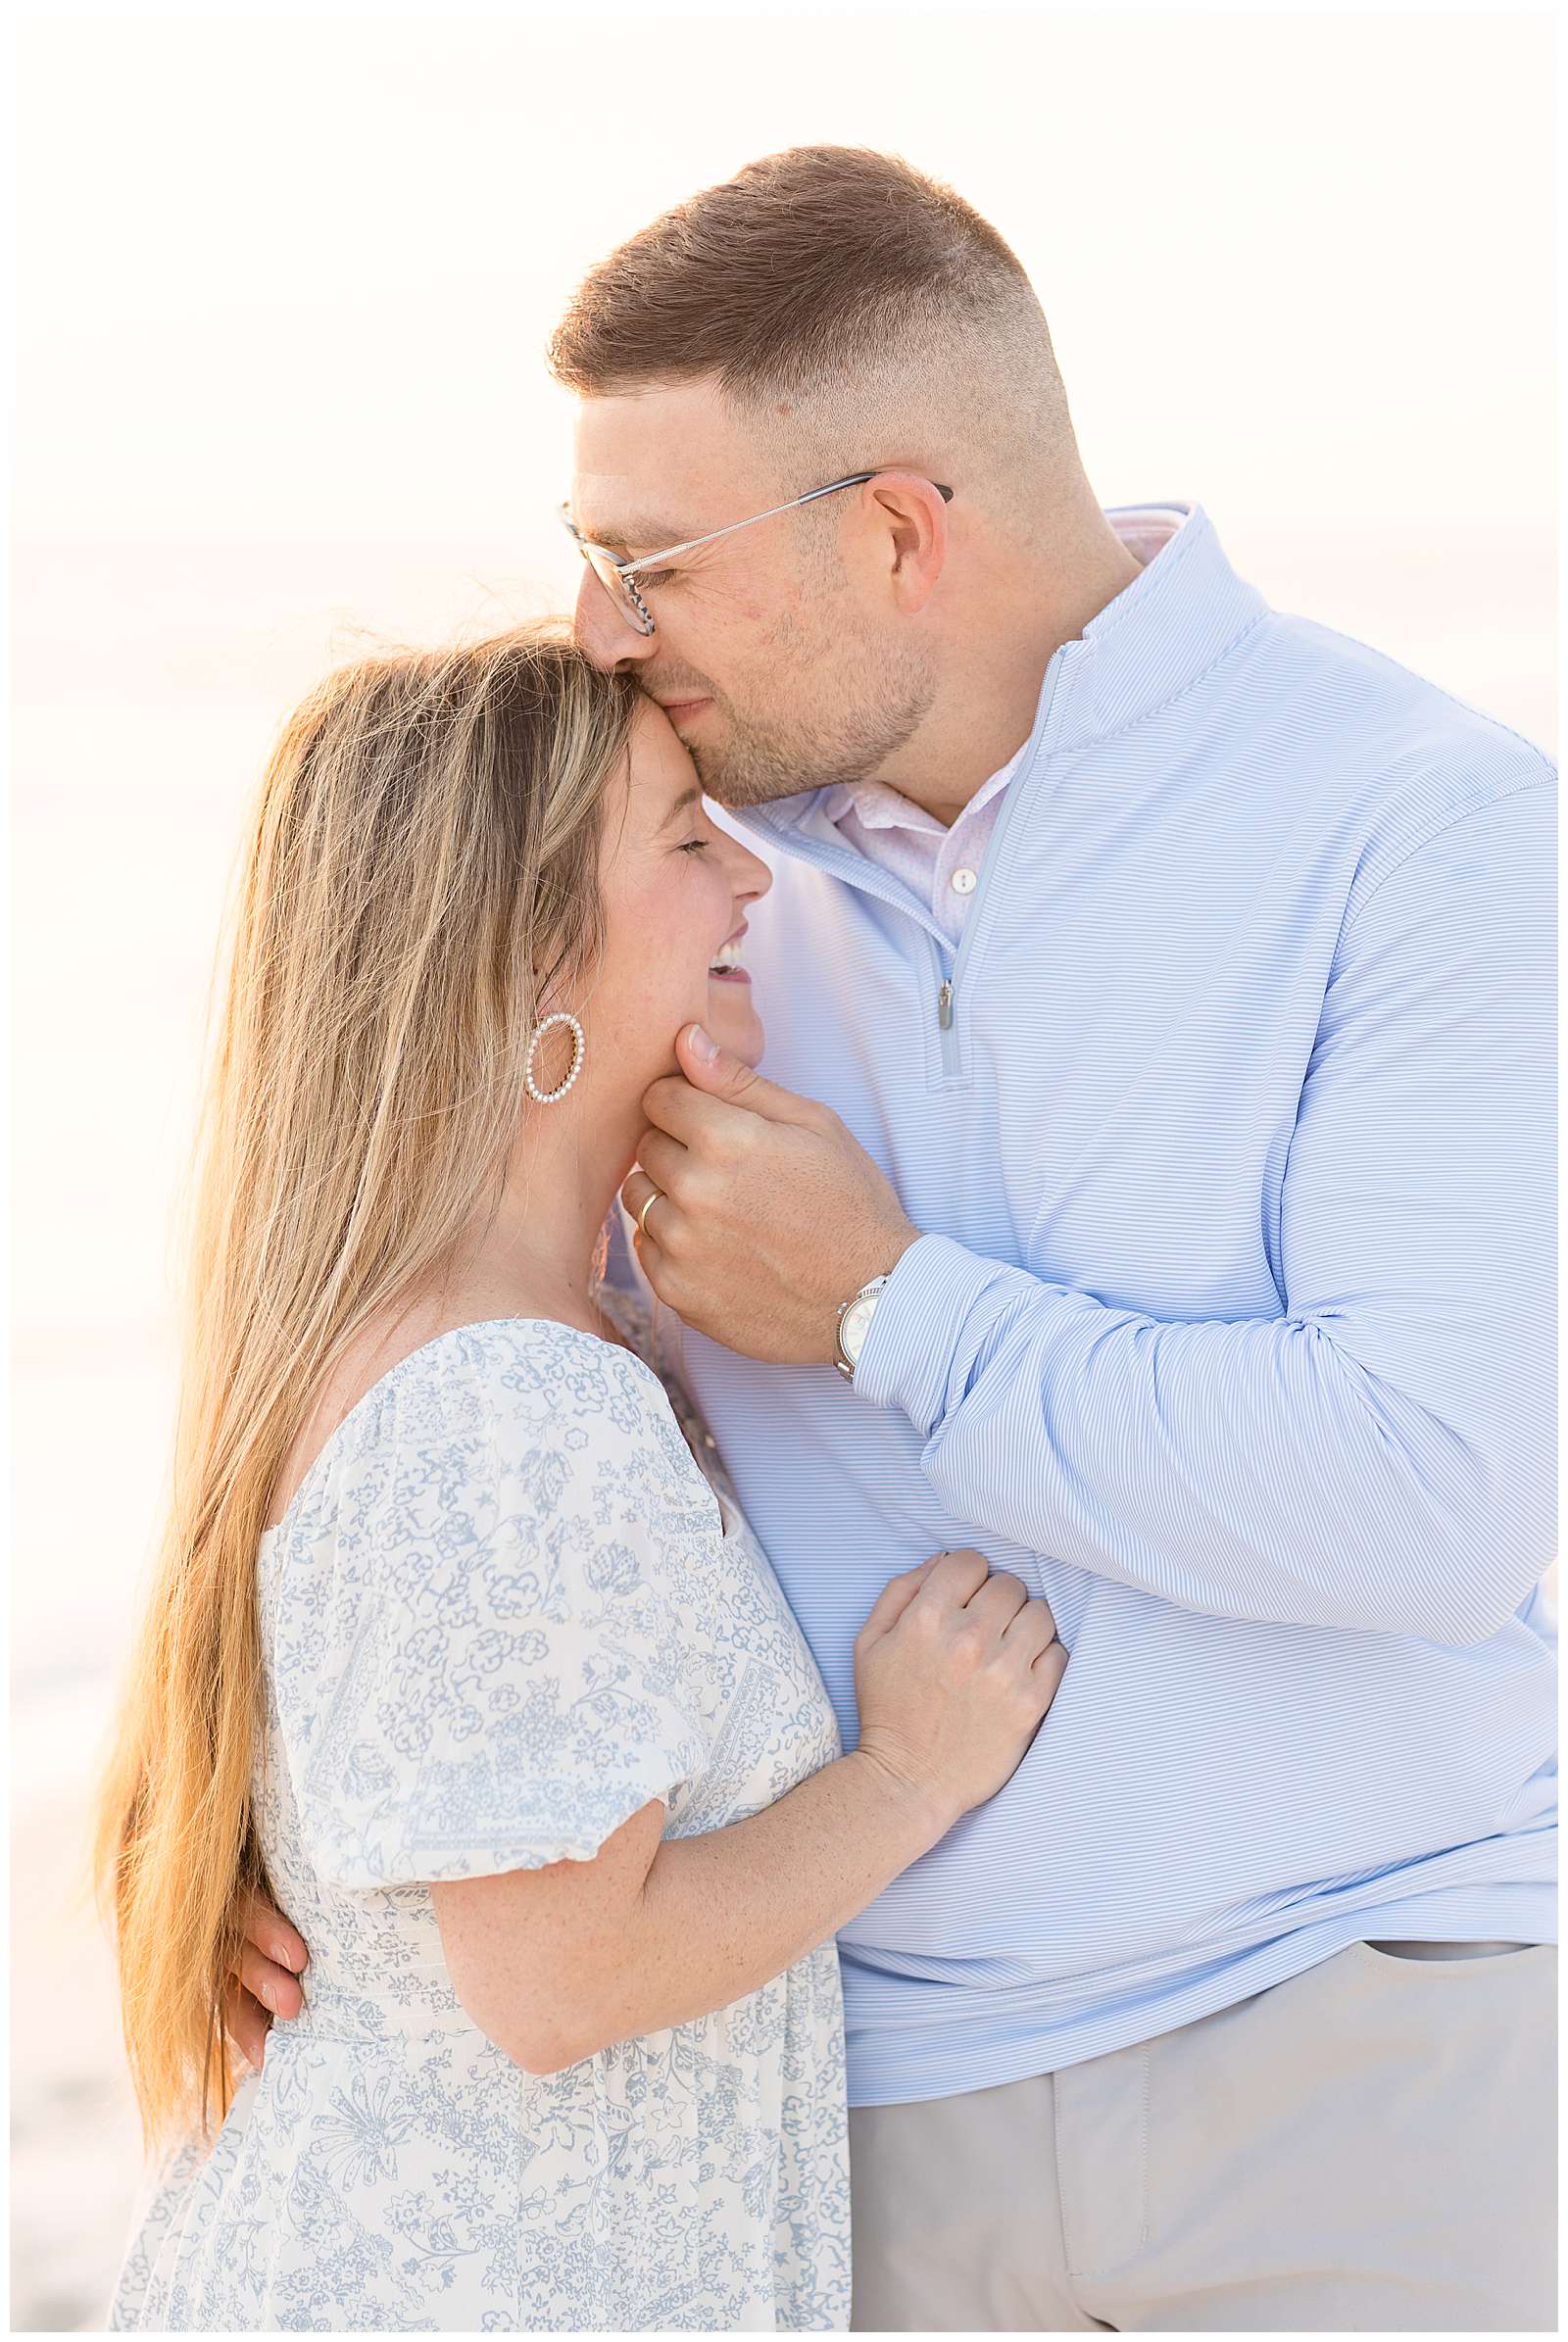 Rosemary Beach family session features an image of a couple standing close together as she puts her hand on his belly and he pulls her in close and holds her chin while giving her a kiss on her forehead.  They coordinate in white, and light blue.  See more of this photography couple on the blog today! -rebeccaricephoto.com